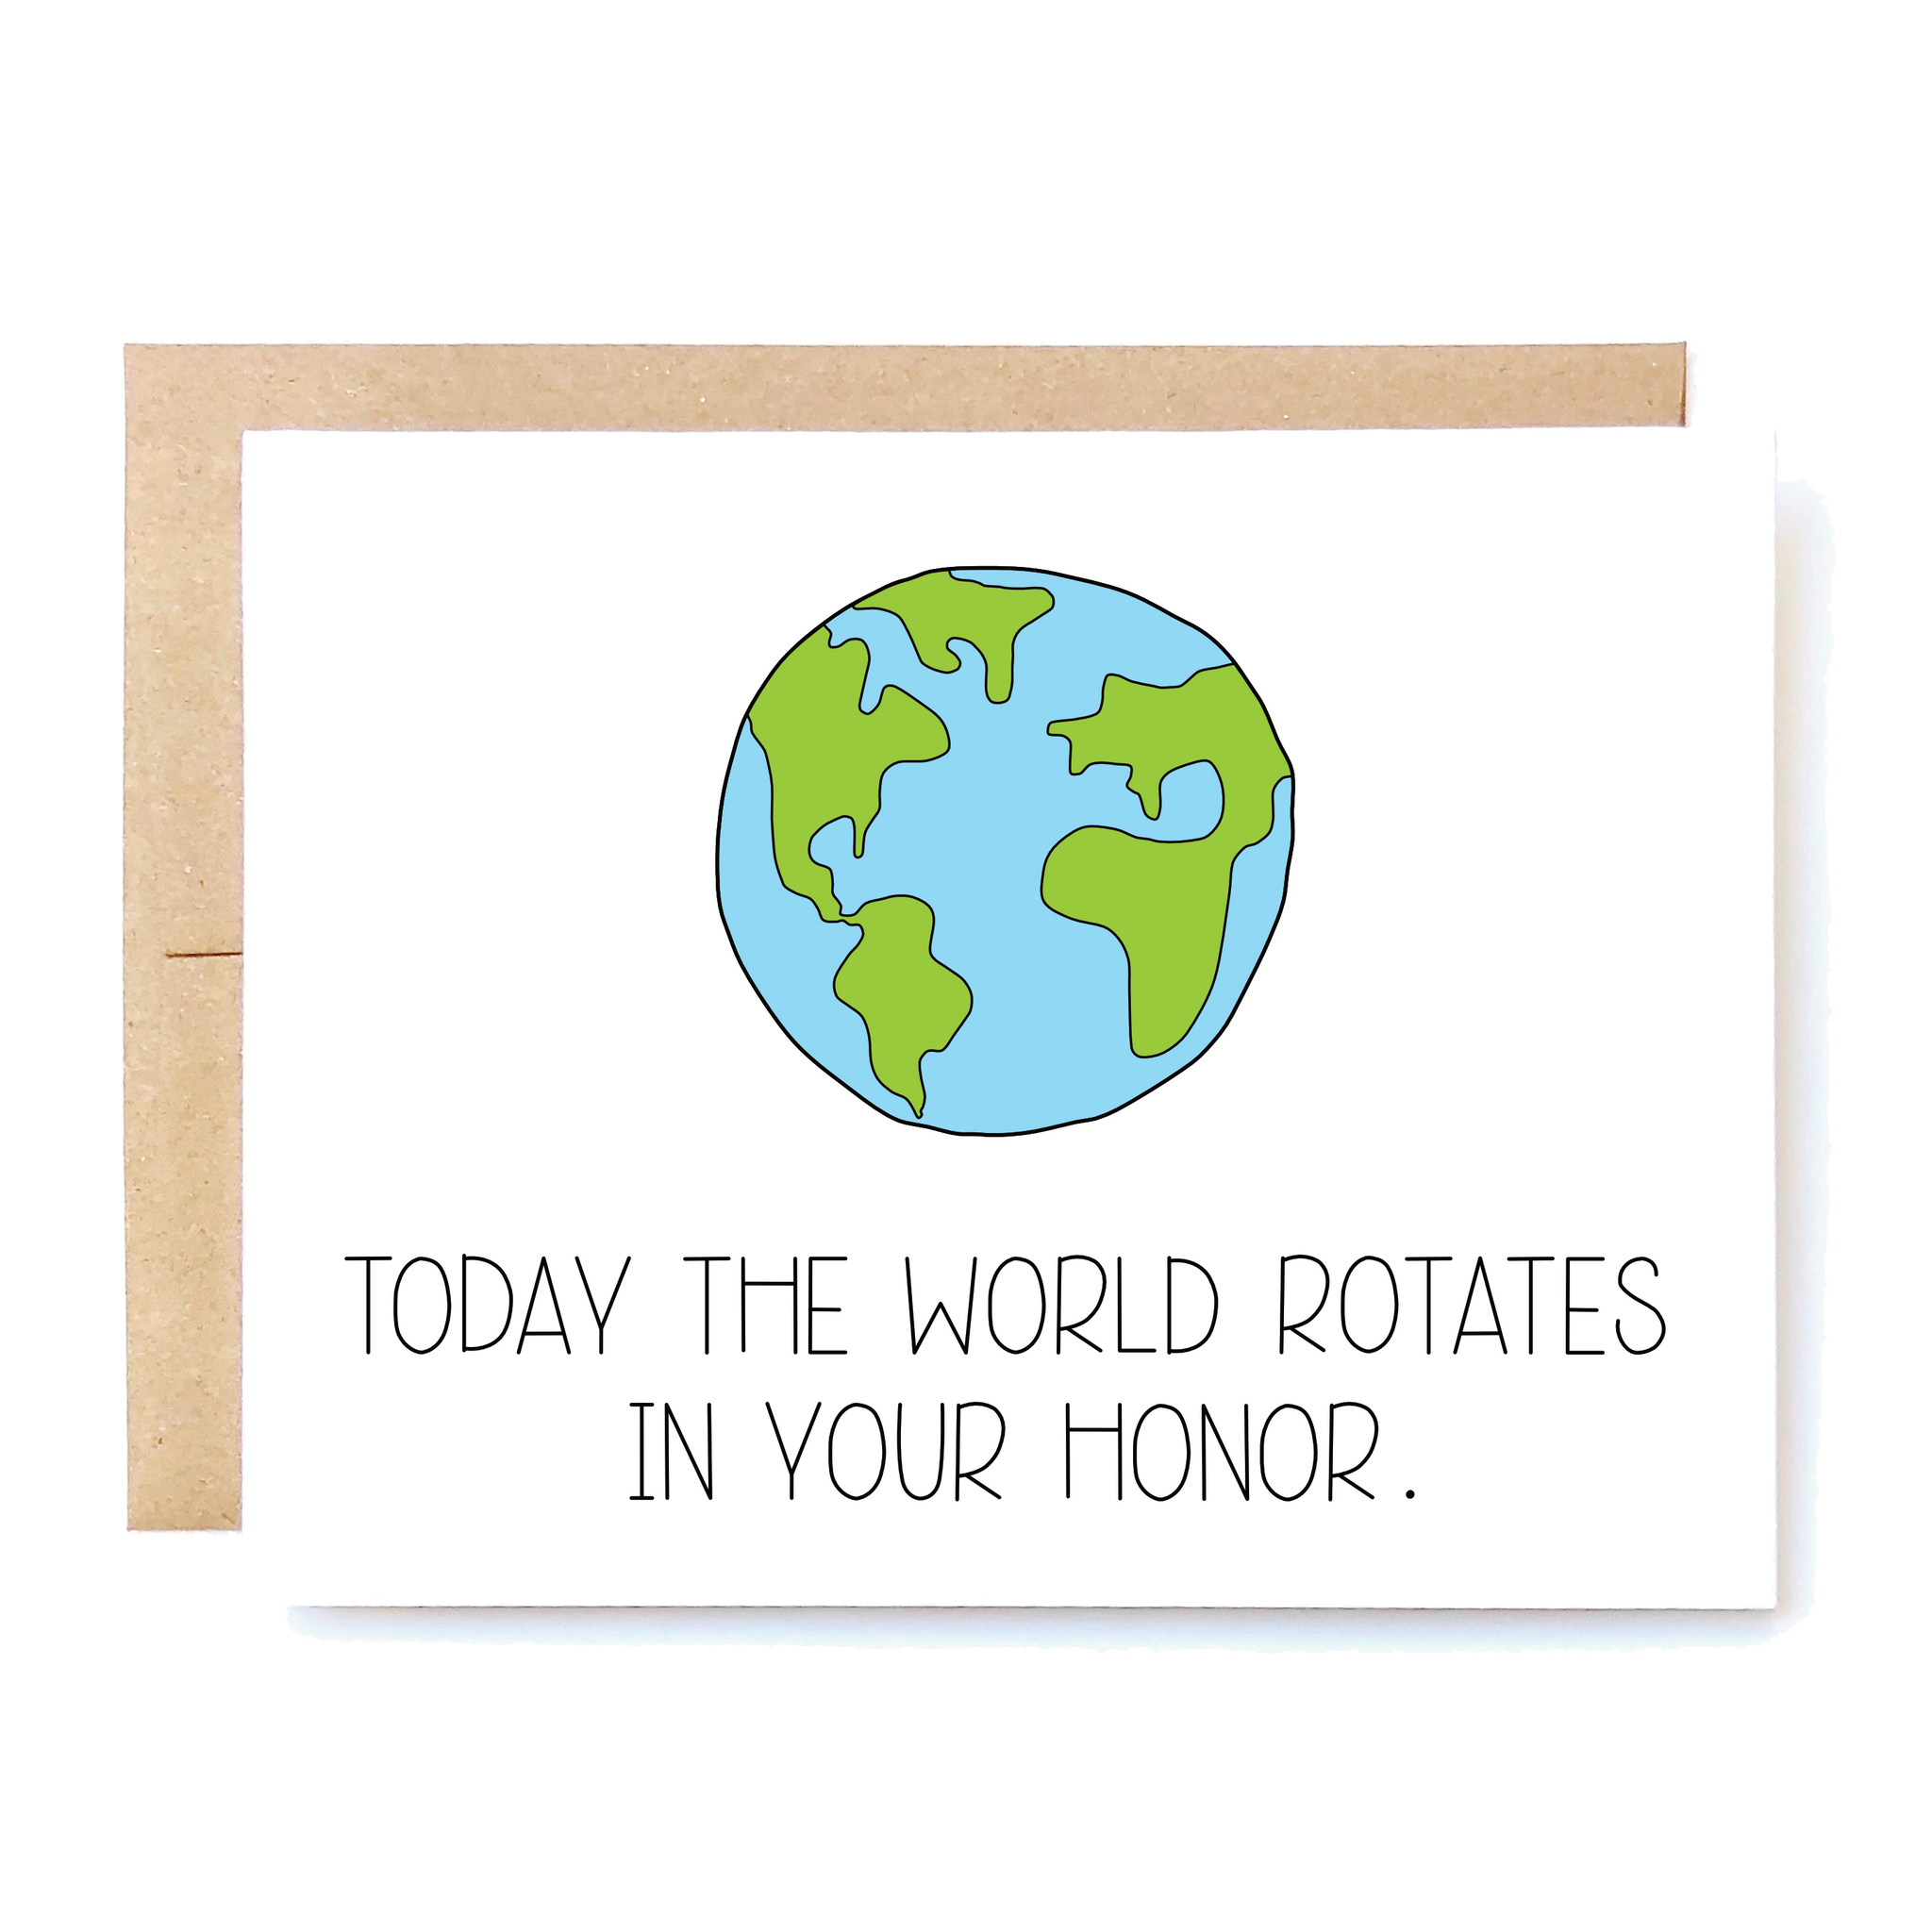 Card Front: Today the world rotates in your honor.